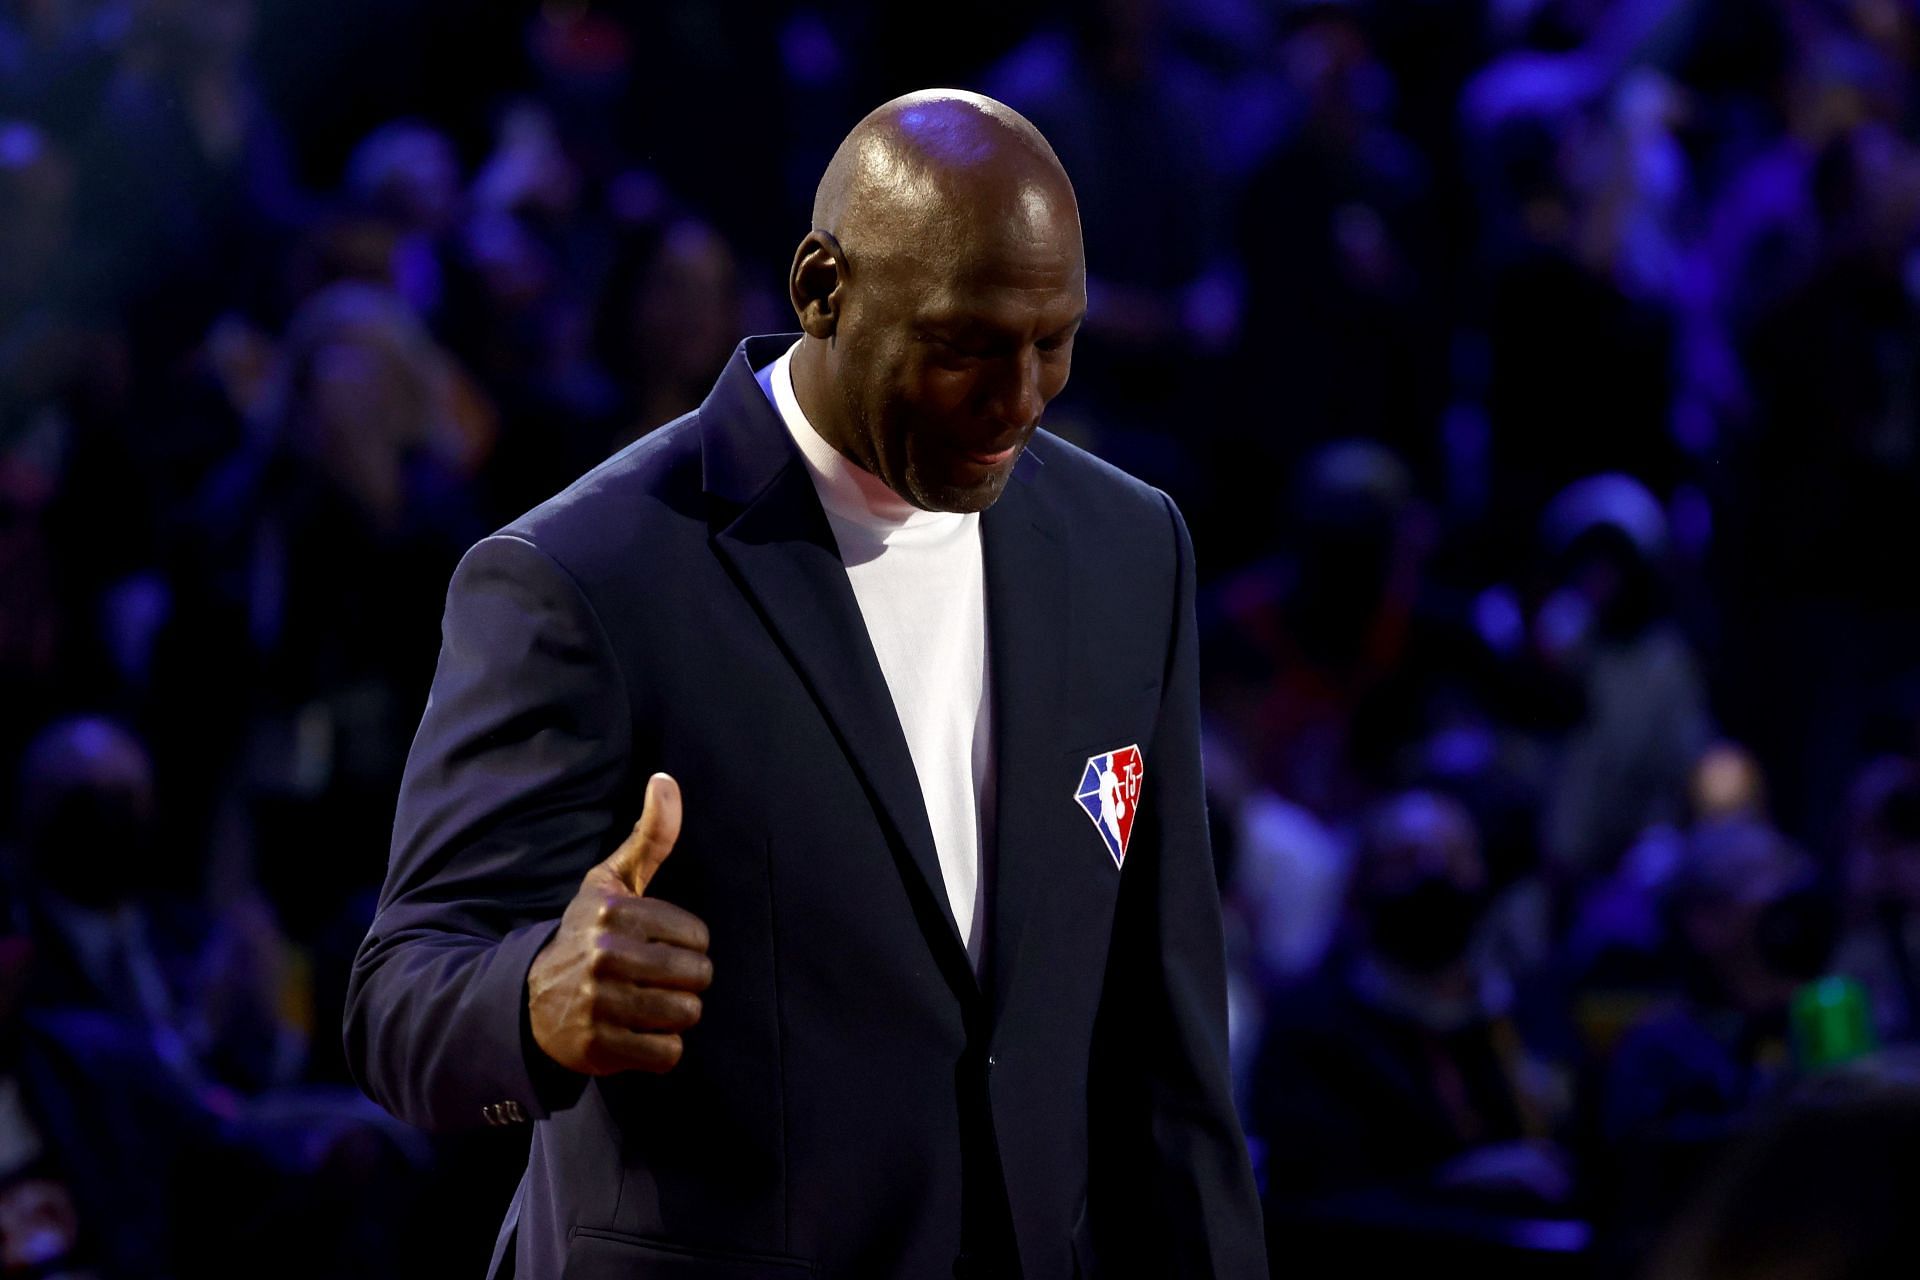 Michael Jordan reacts after being introduced as part of the NBA 75th Anniversary Team